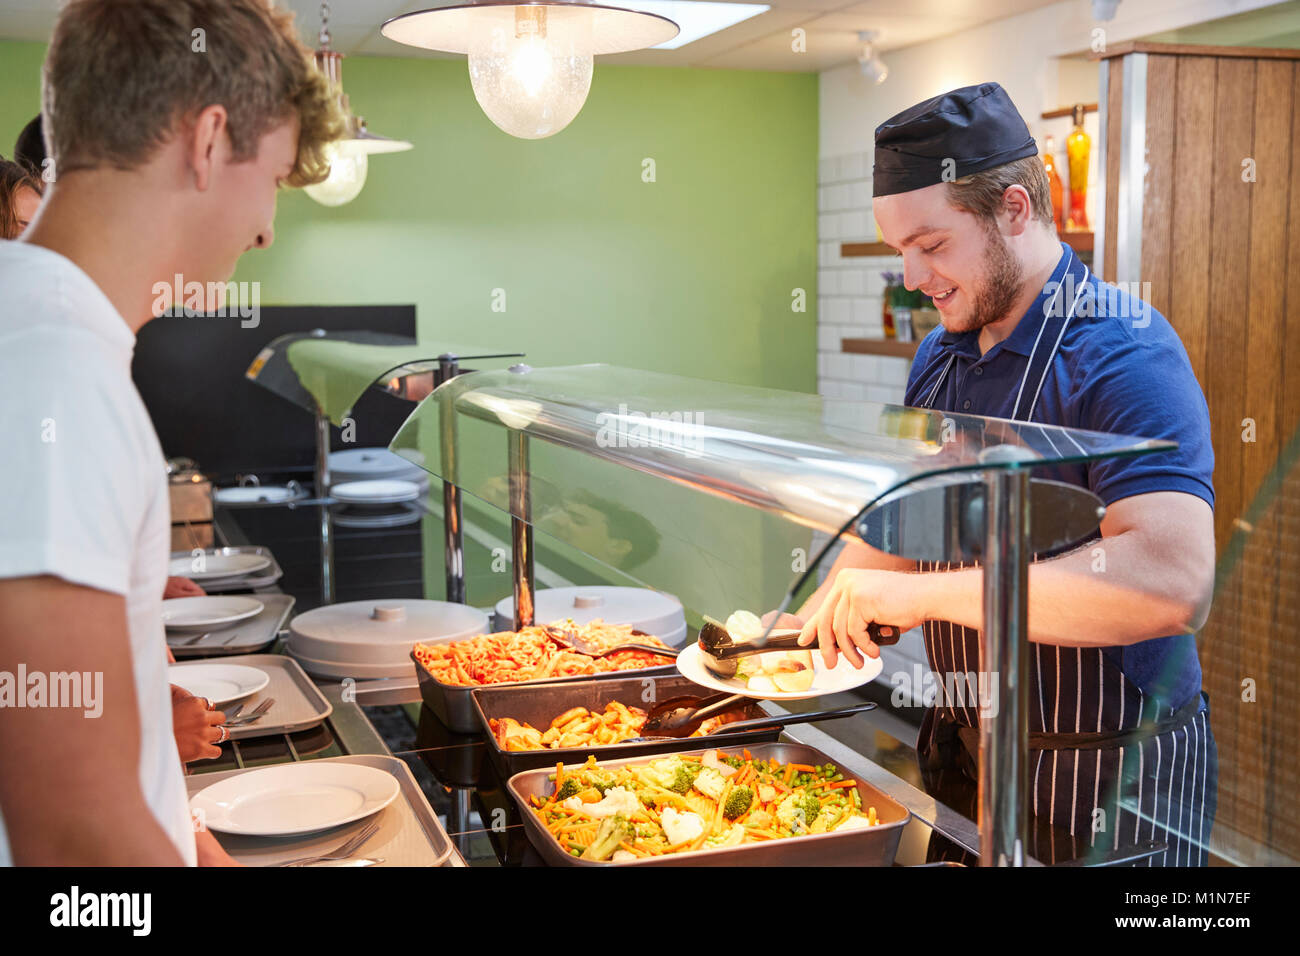 Teenage Students Being Served Meal In School Canteen Stock Photo